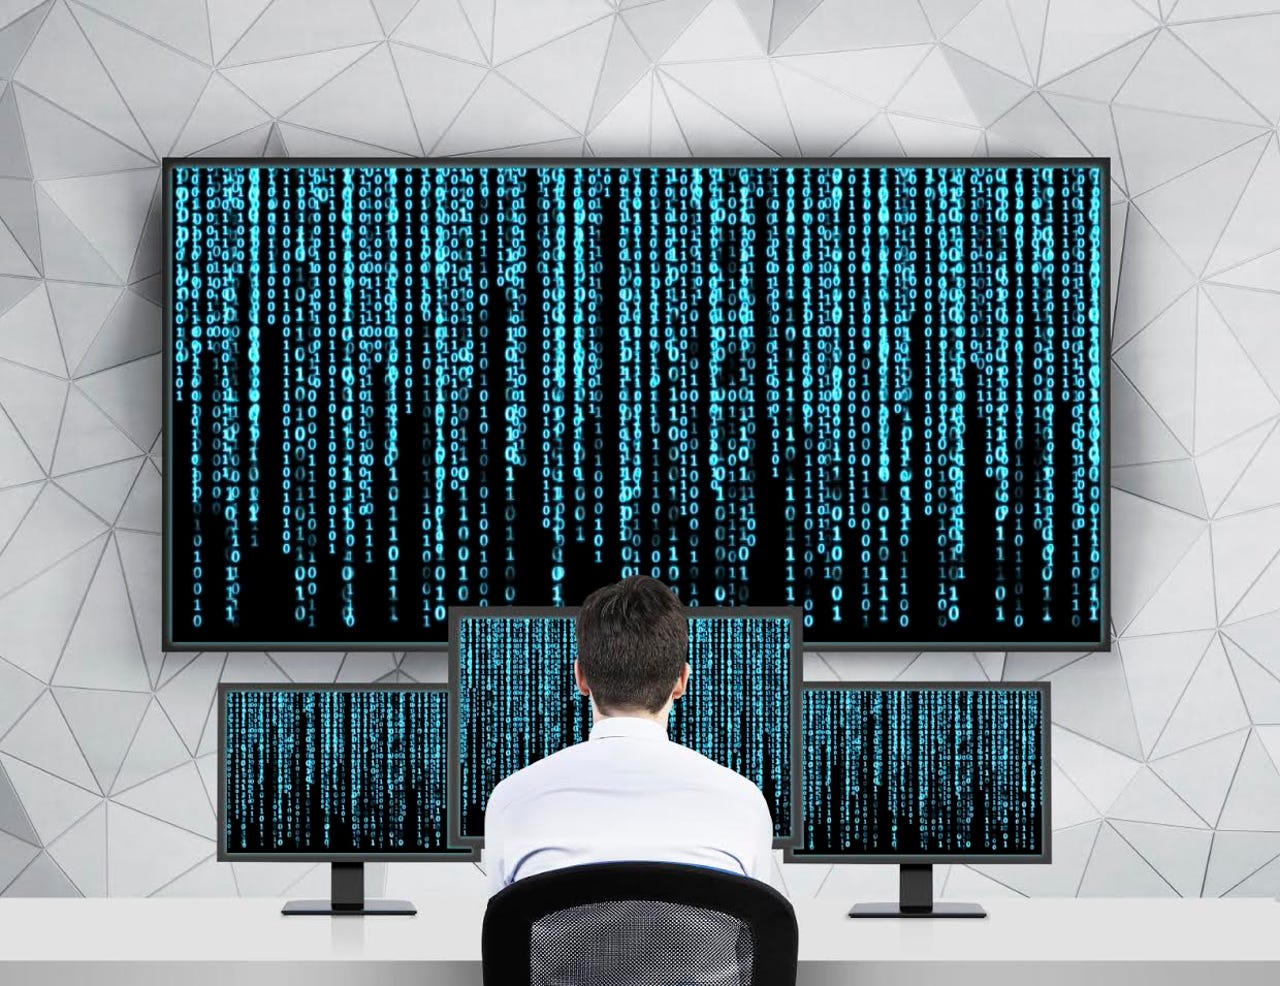 man-in-front-of-computer-viewing-cyber-threats.jpg